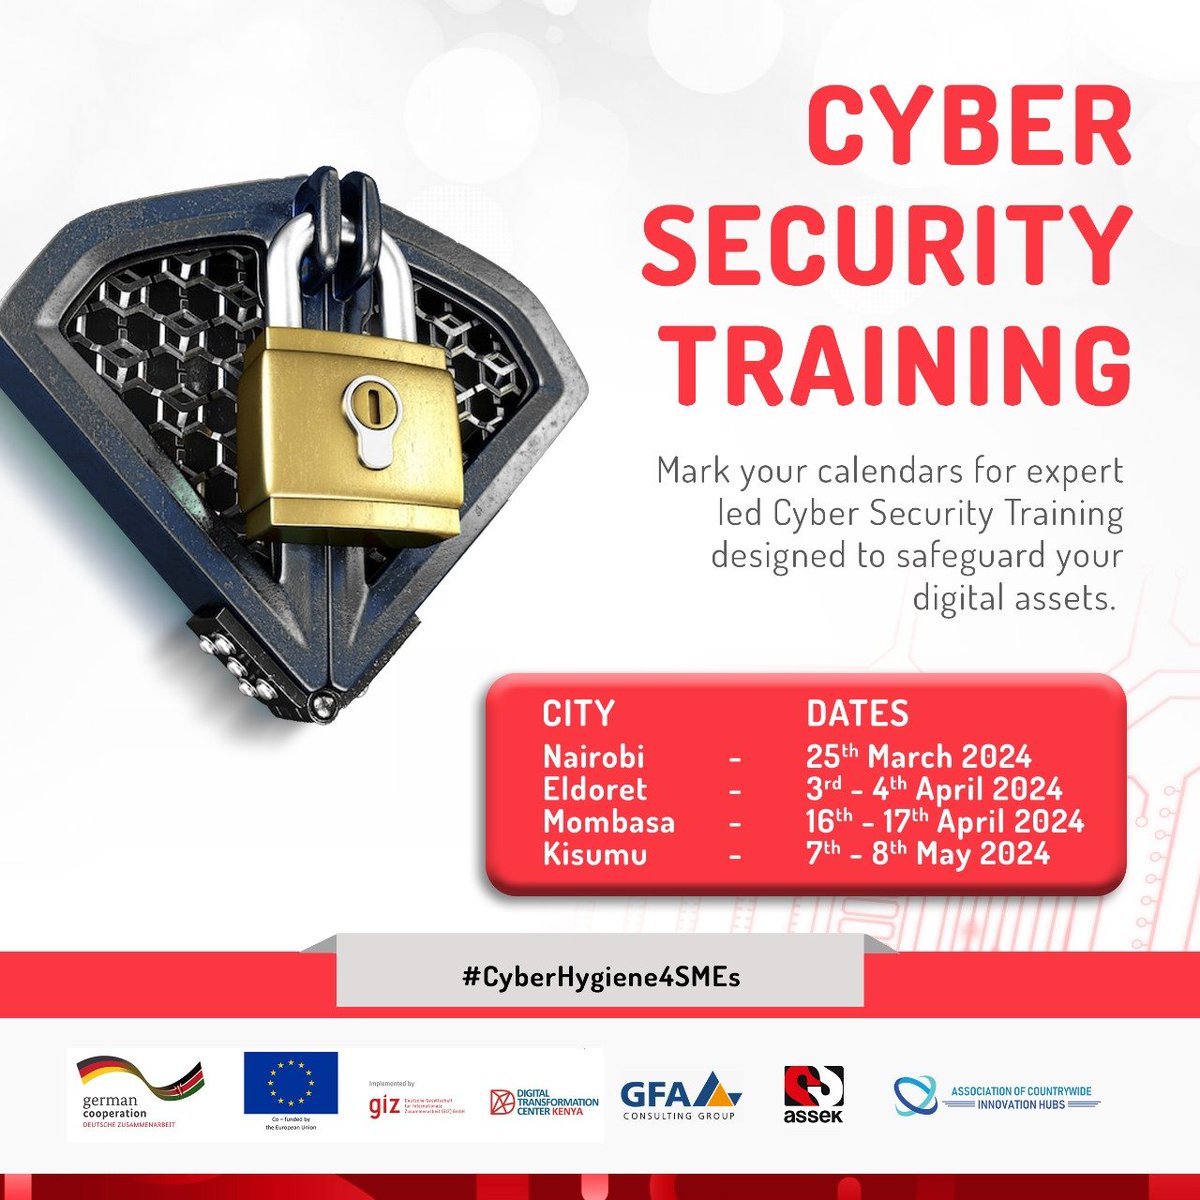 Great opportunity- #CyberSecurity Training for #SME! Cyber Security is a big issue! This training assists to safeguard digital assets! @giz_gmbh #Kenya, @DTC_Kenya, in partnership with @ASSEKnews and @CountrywideHubs Supported by @BMZ_Bund and @EUinKenya #CyberHygiene4SMEs